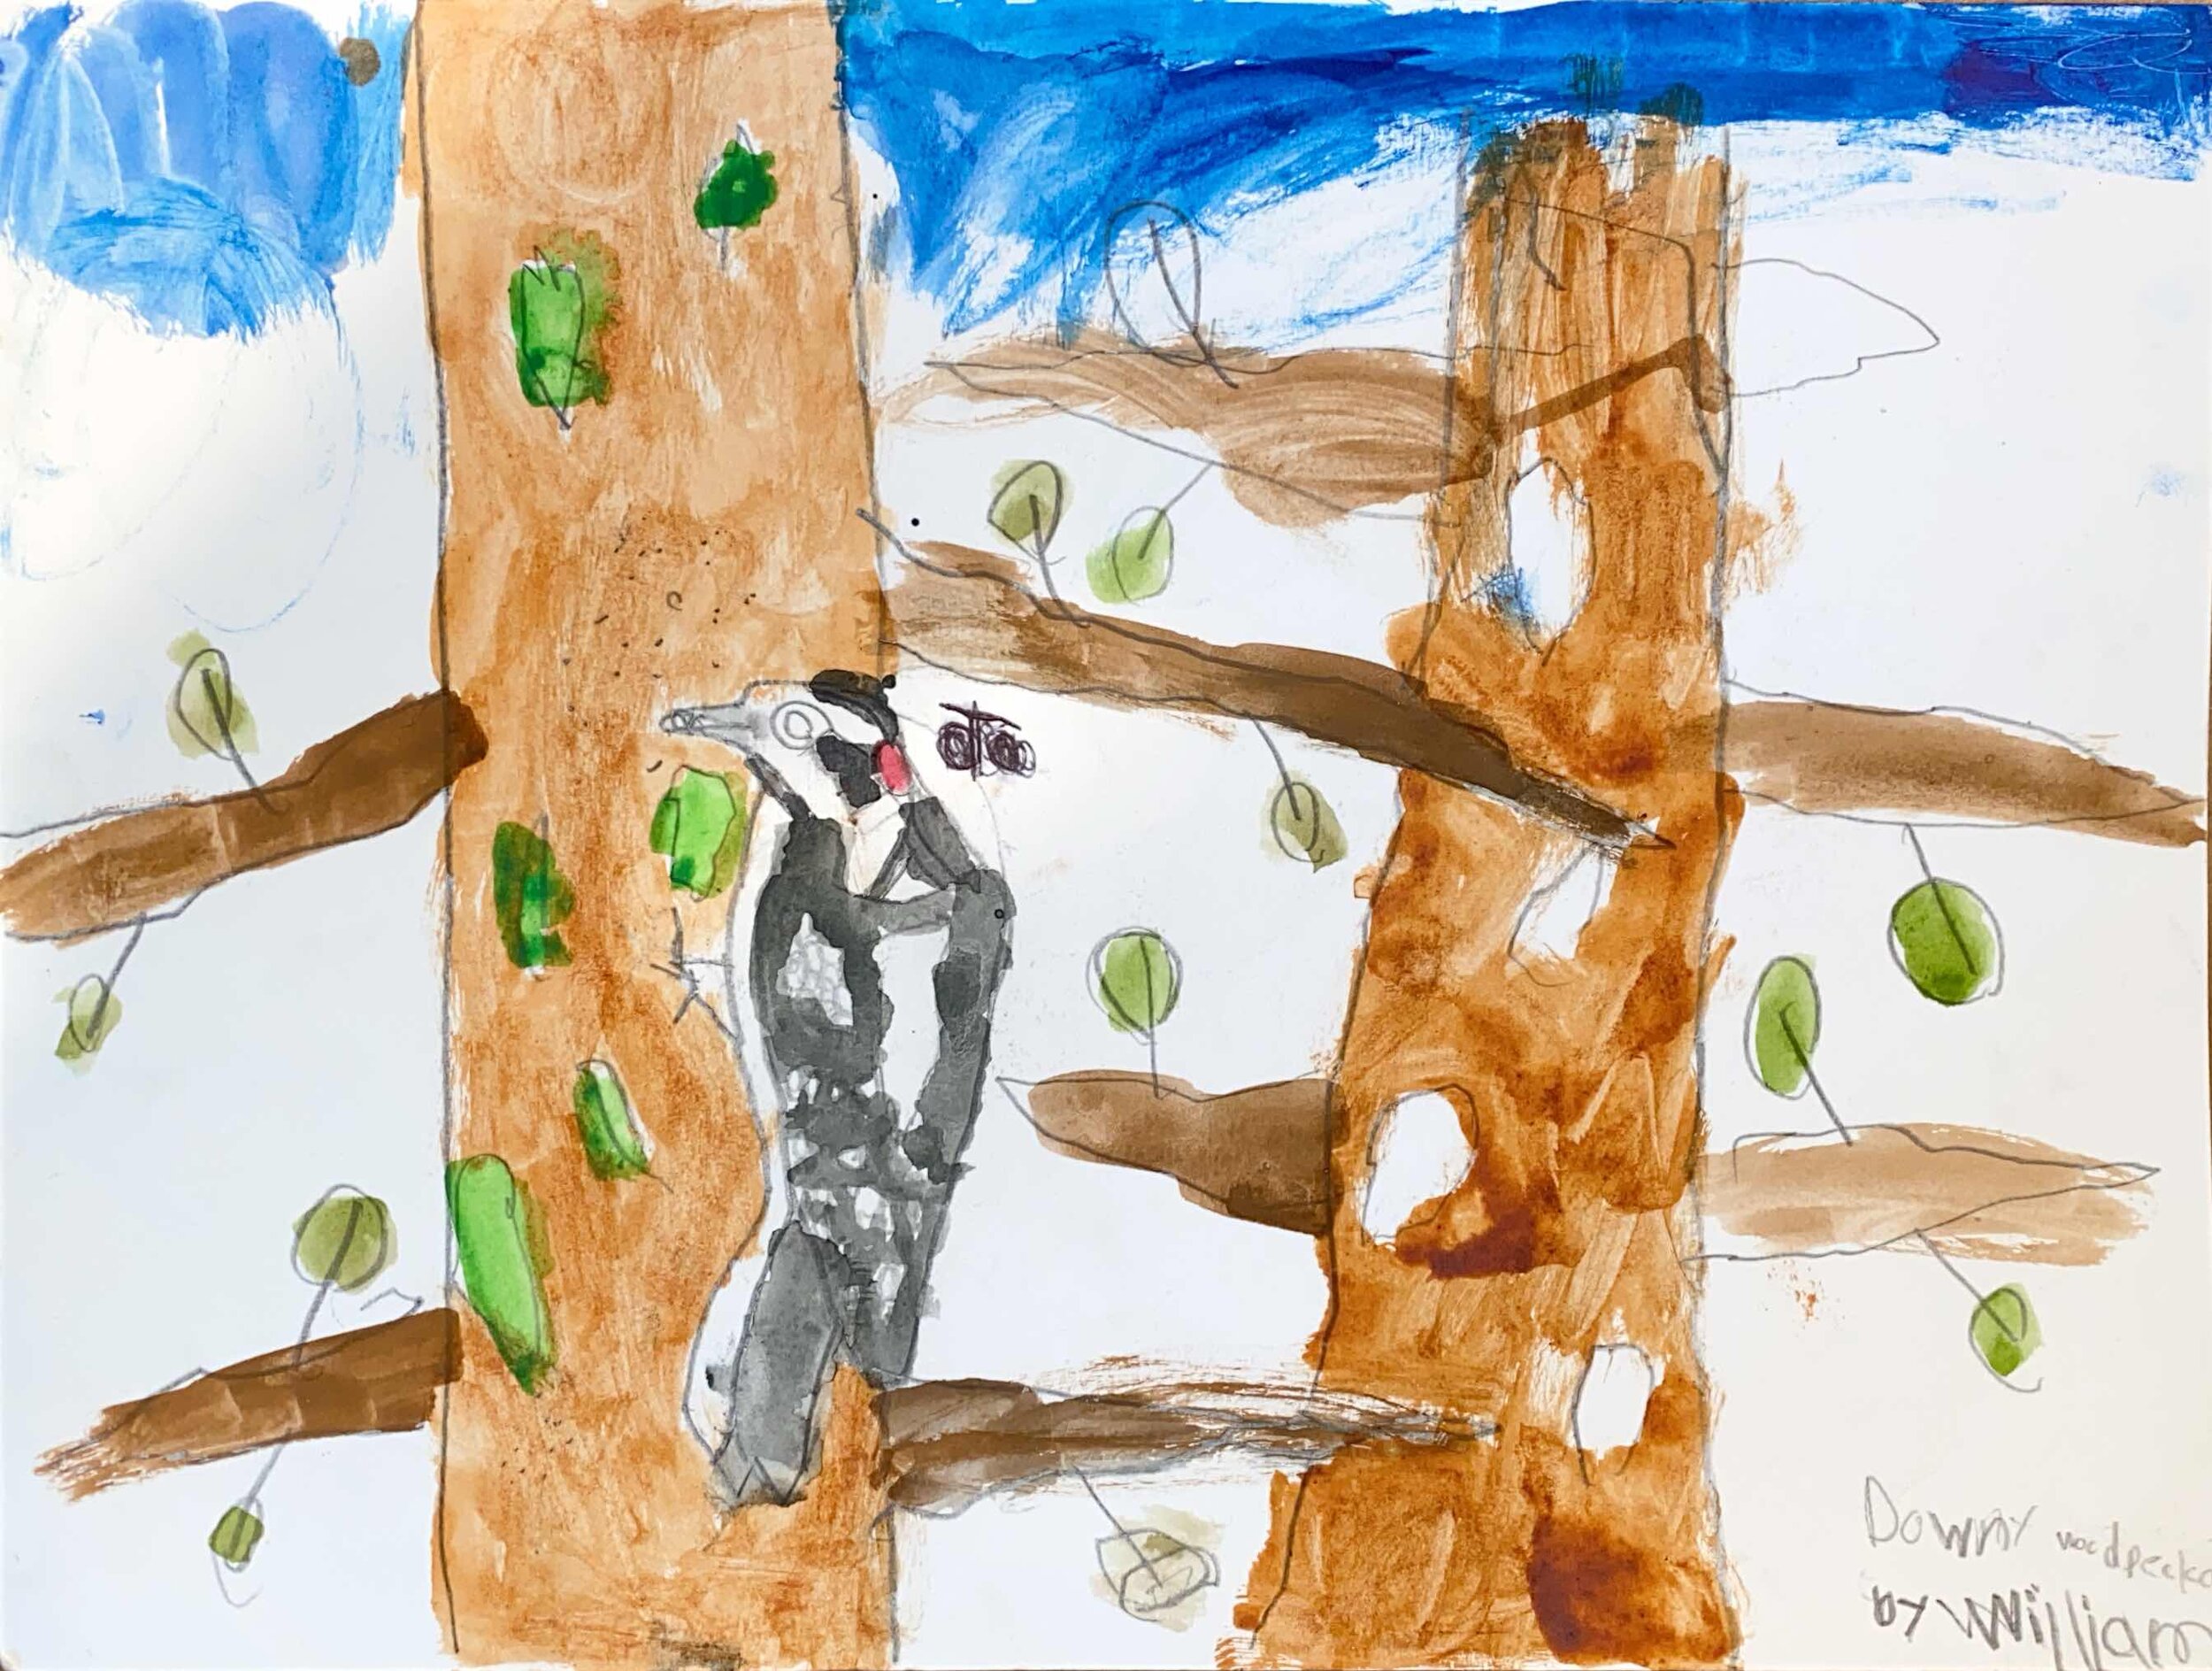 Downy Woodpecker by William Johnson - 3rd Place and People's Choice - Grades 1-2